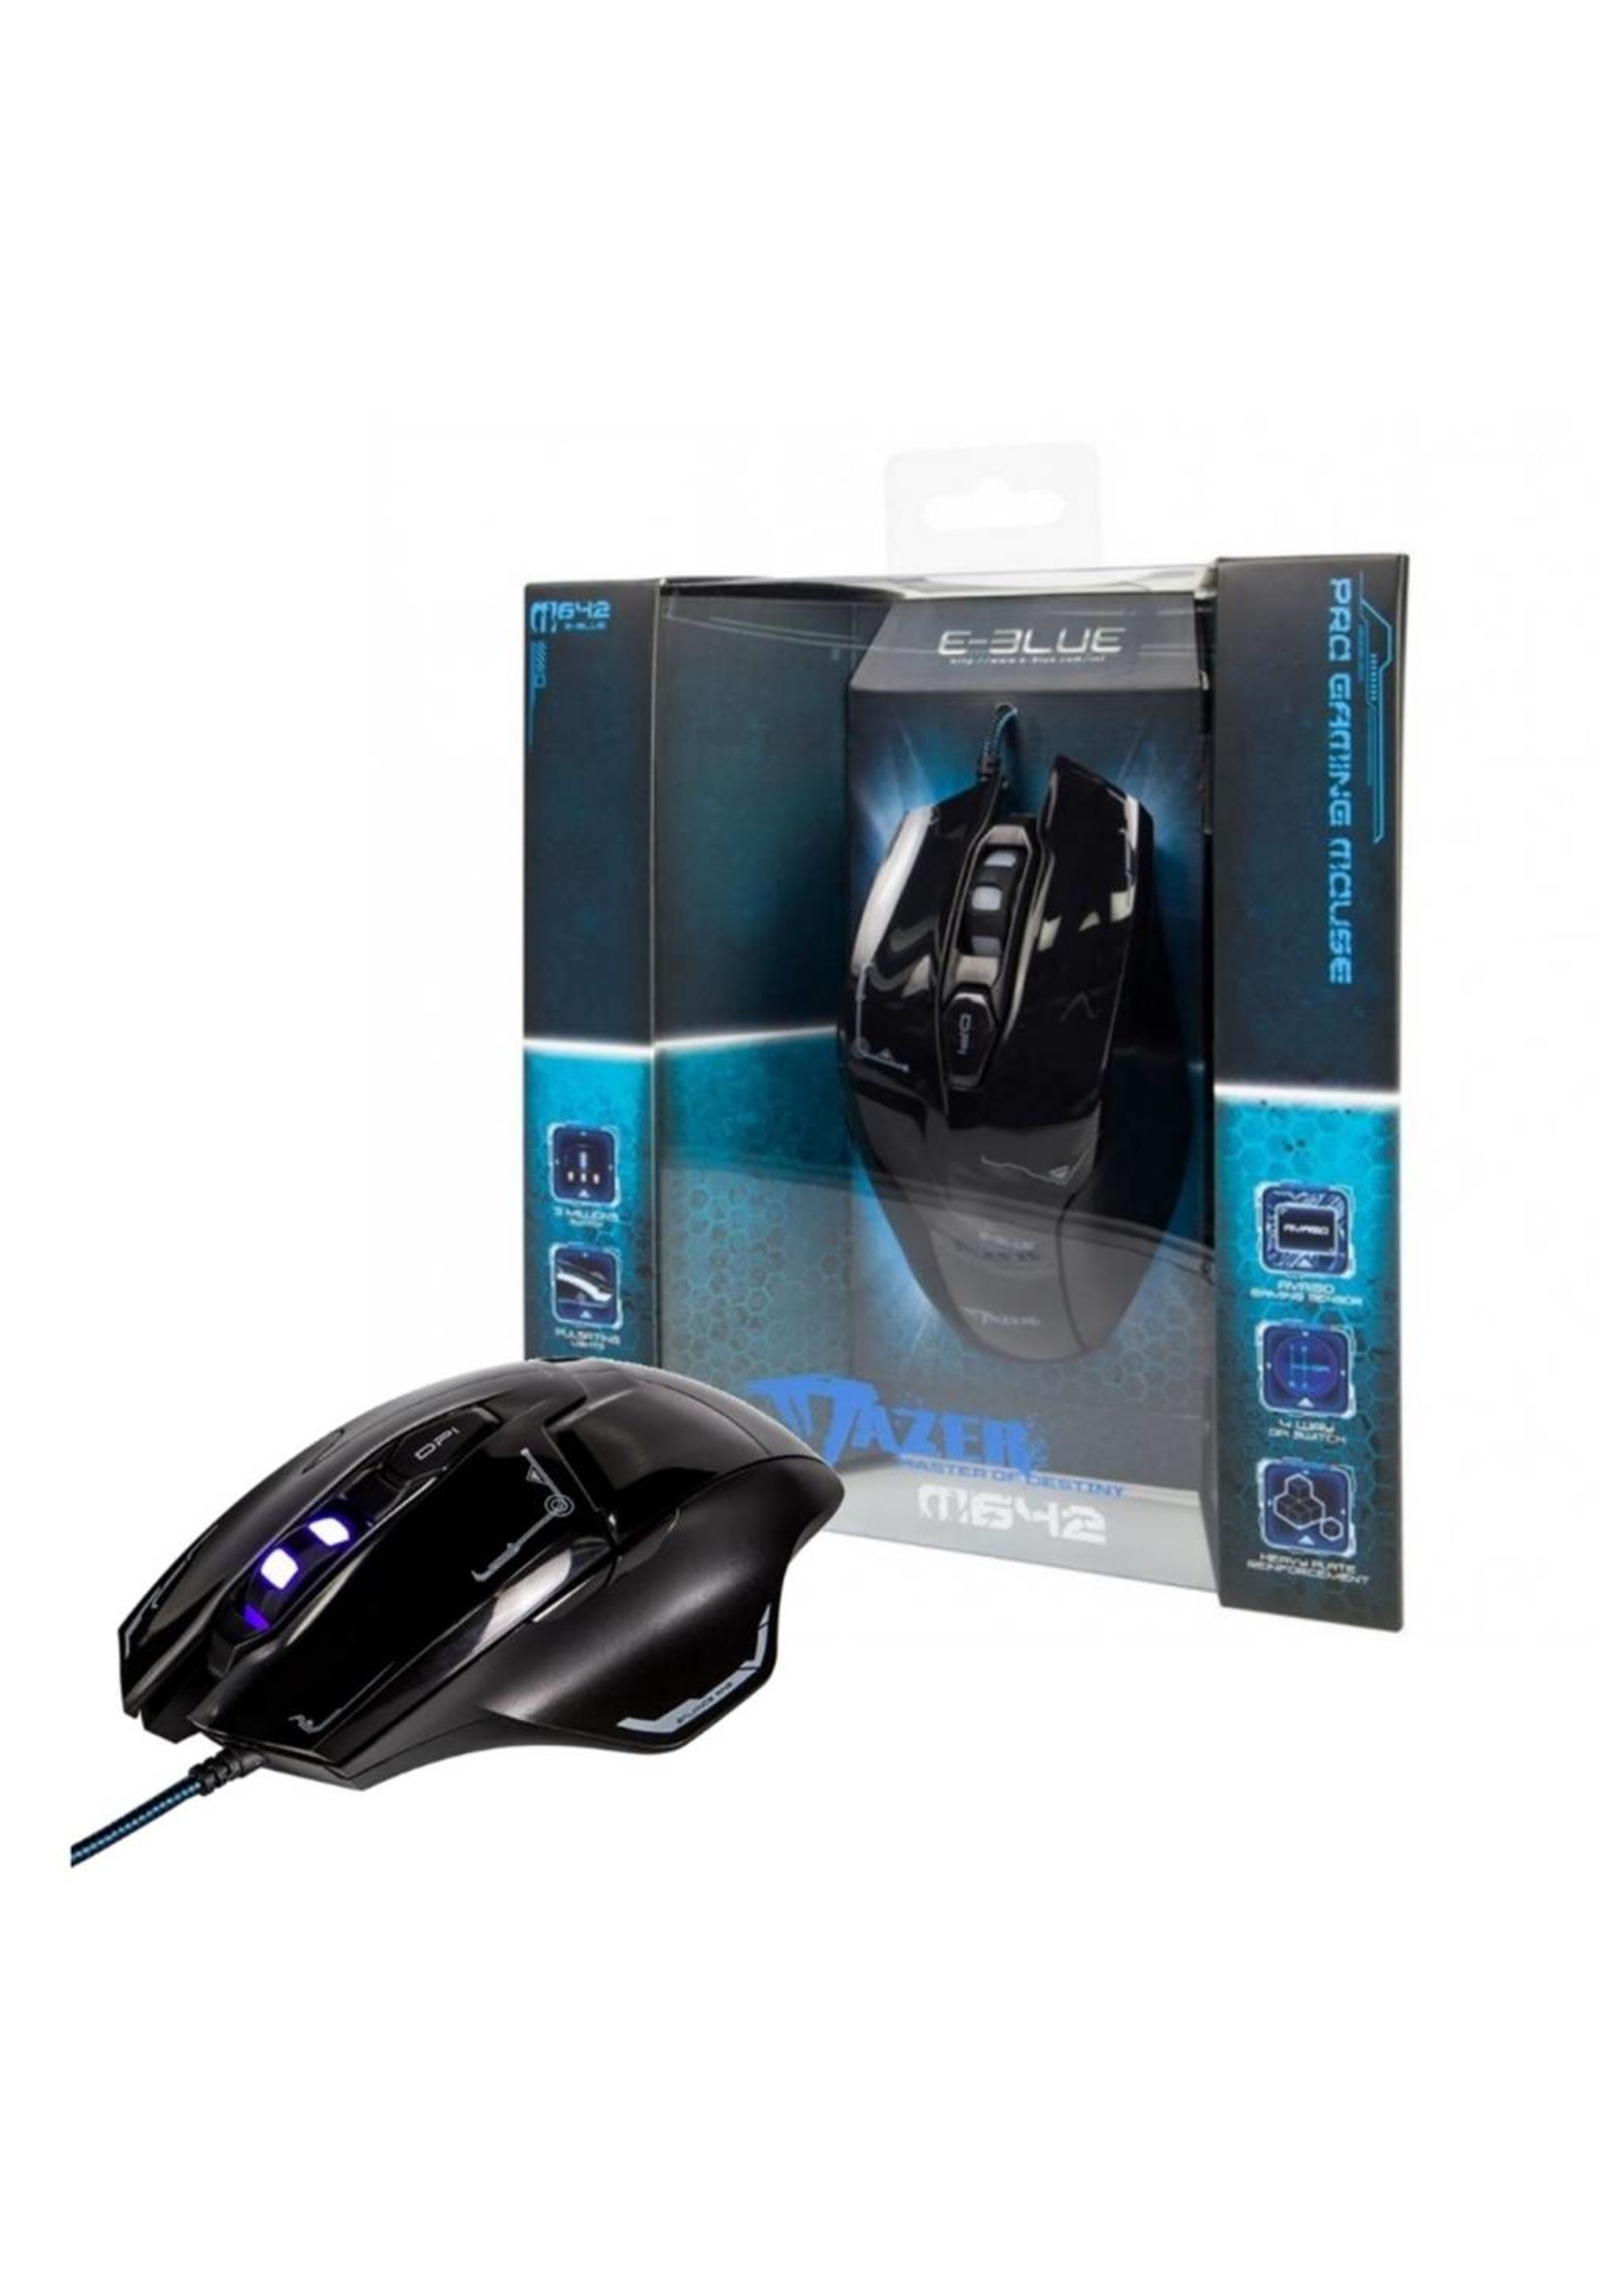 Generic PC Mazer EMS642 Wired Gaming Mouse Black